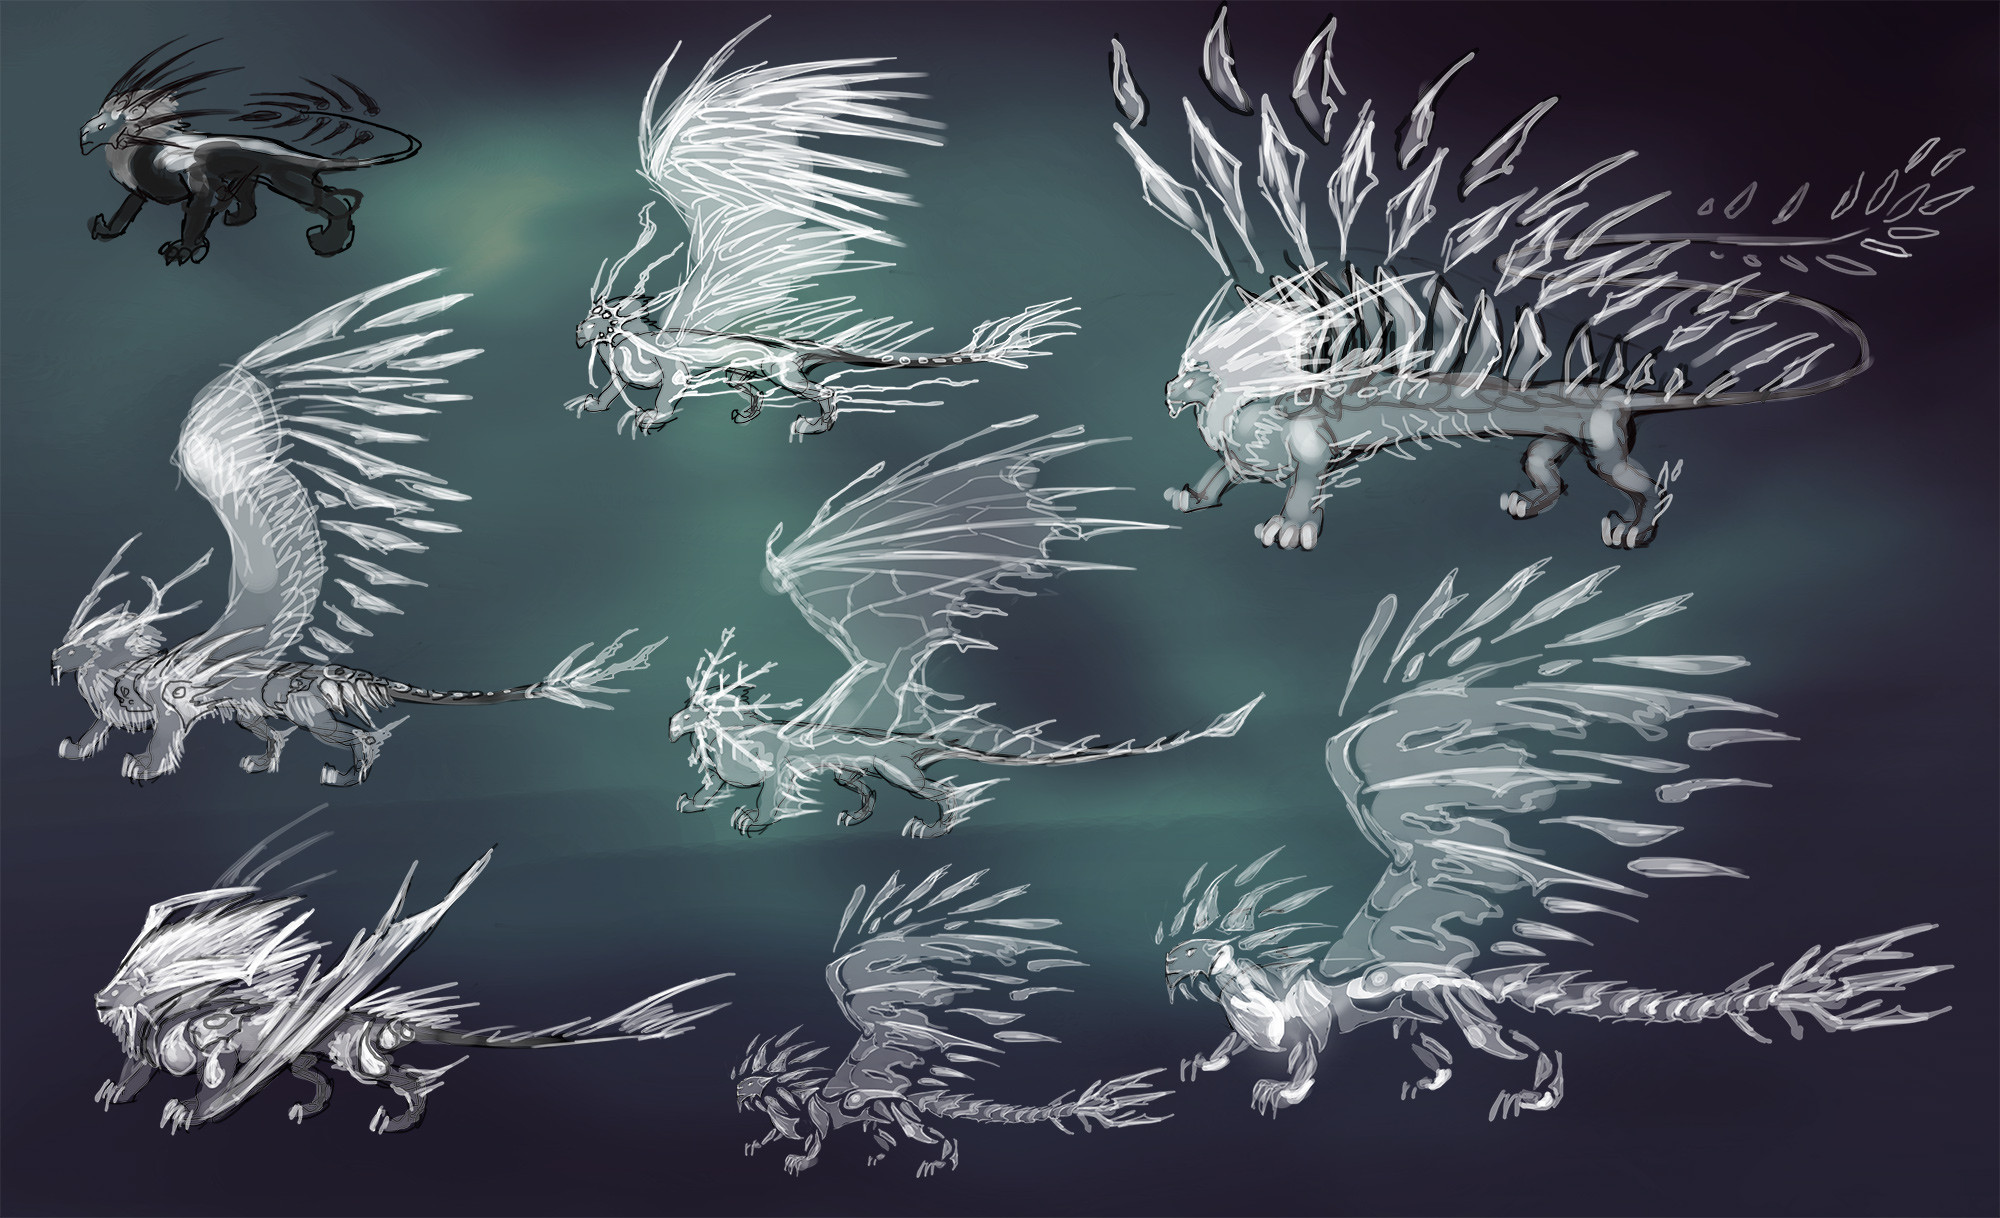 Concept ideas for an ice lion